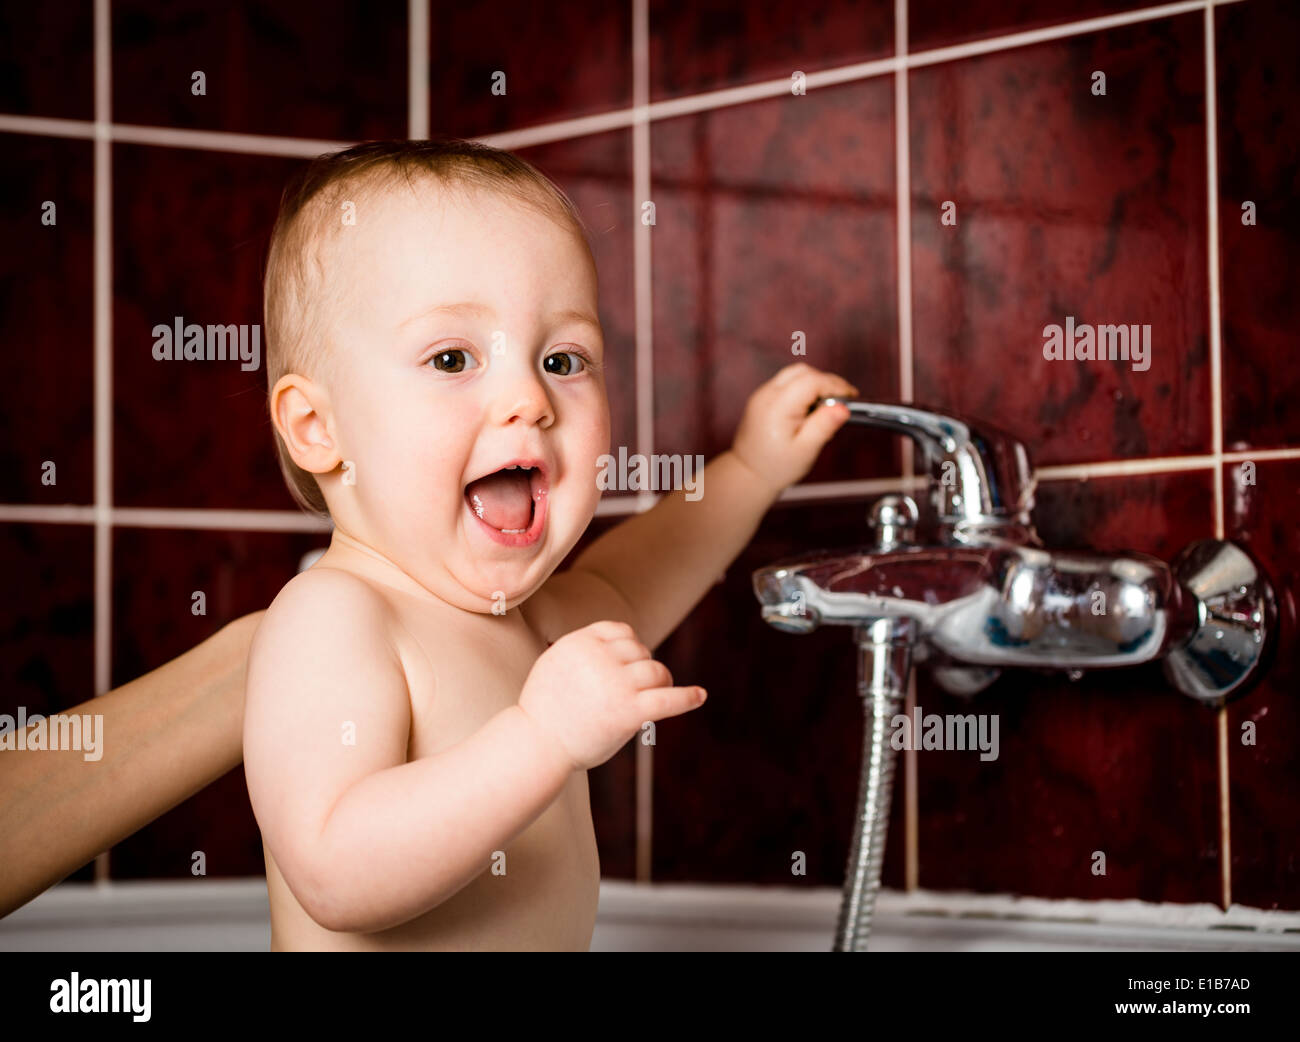 Cute baby playing with water tap in bathroom Stock Photo - Alamy